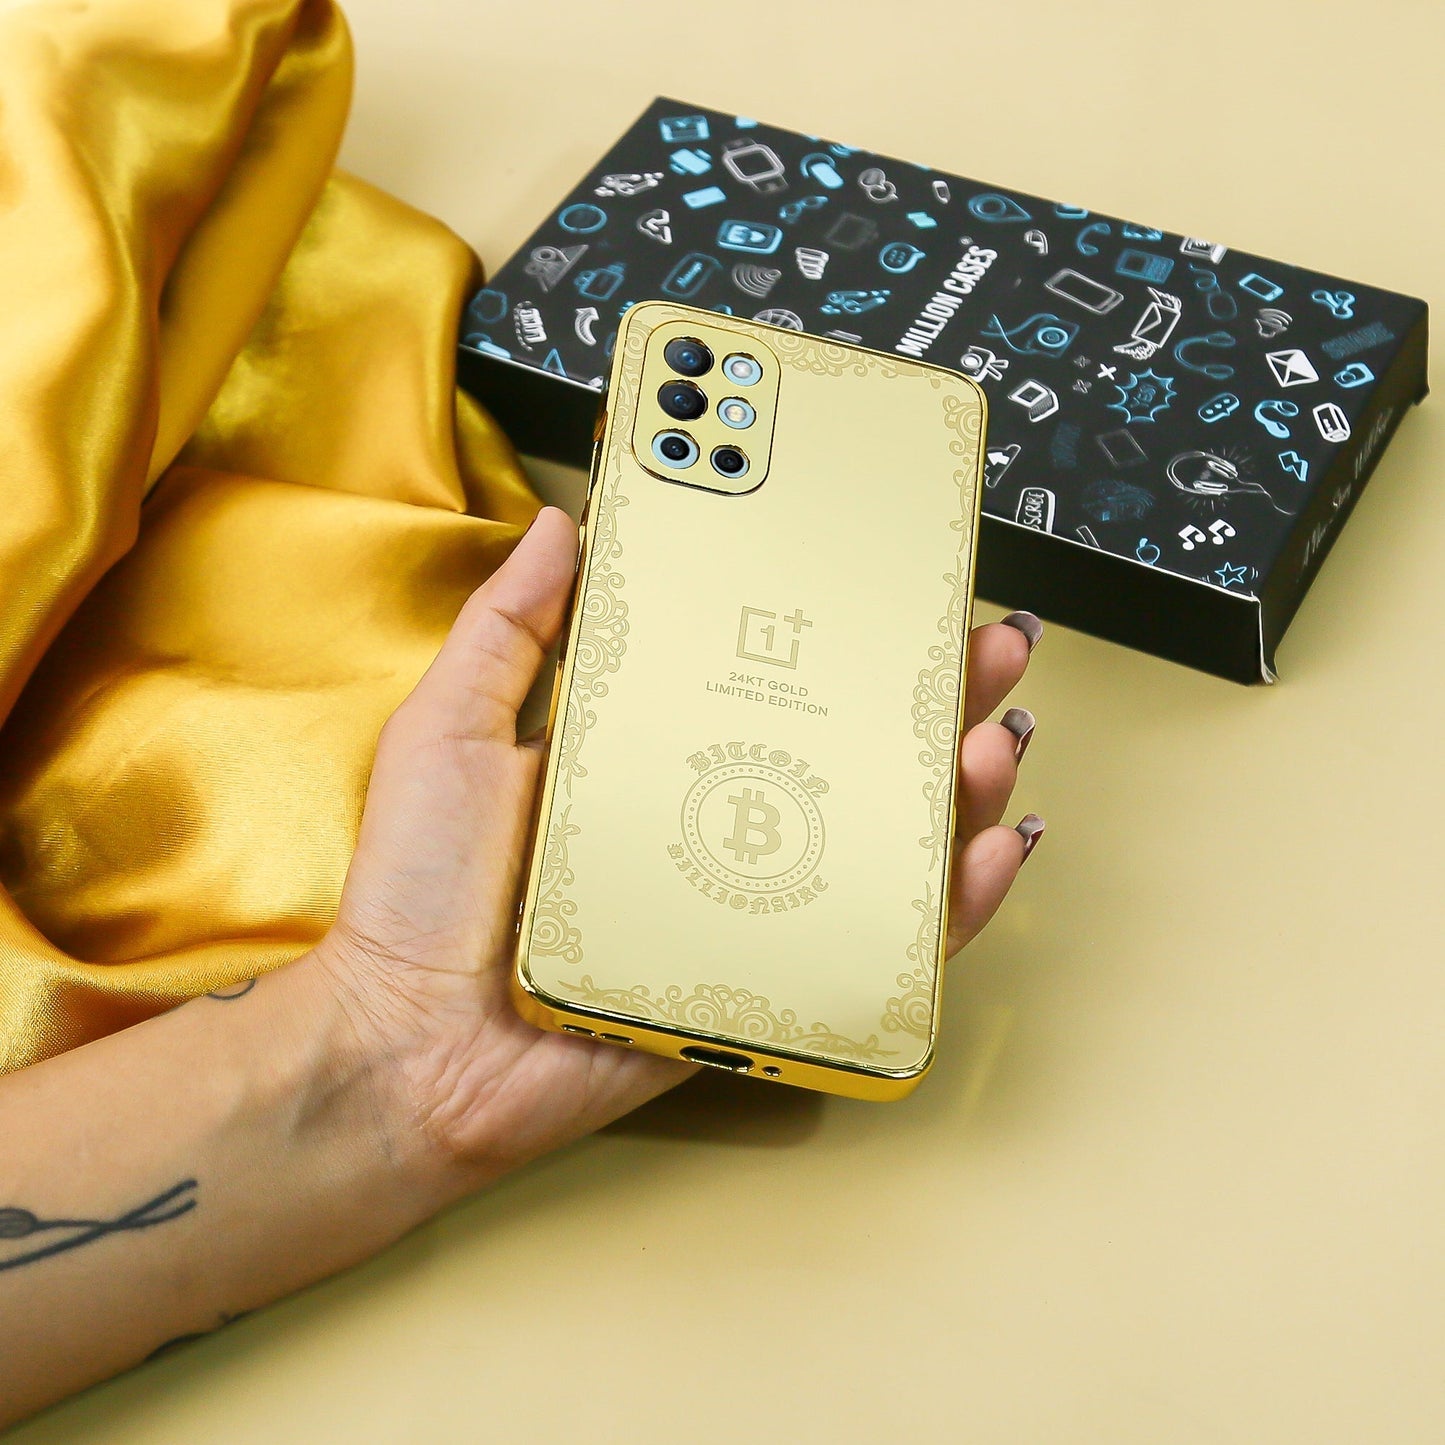 Crafted Gold Bitcoin Luxurious Camera Protective Case - OnePlus